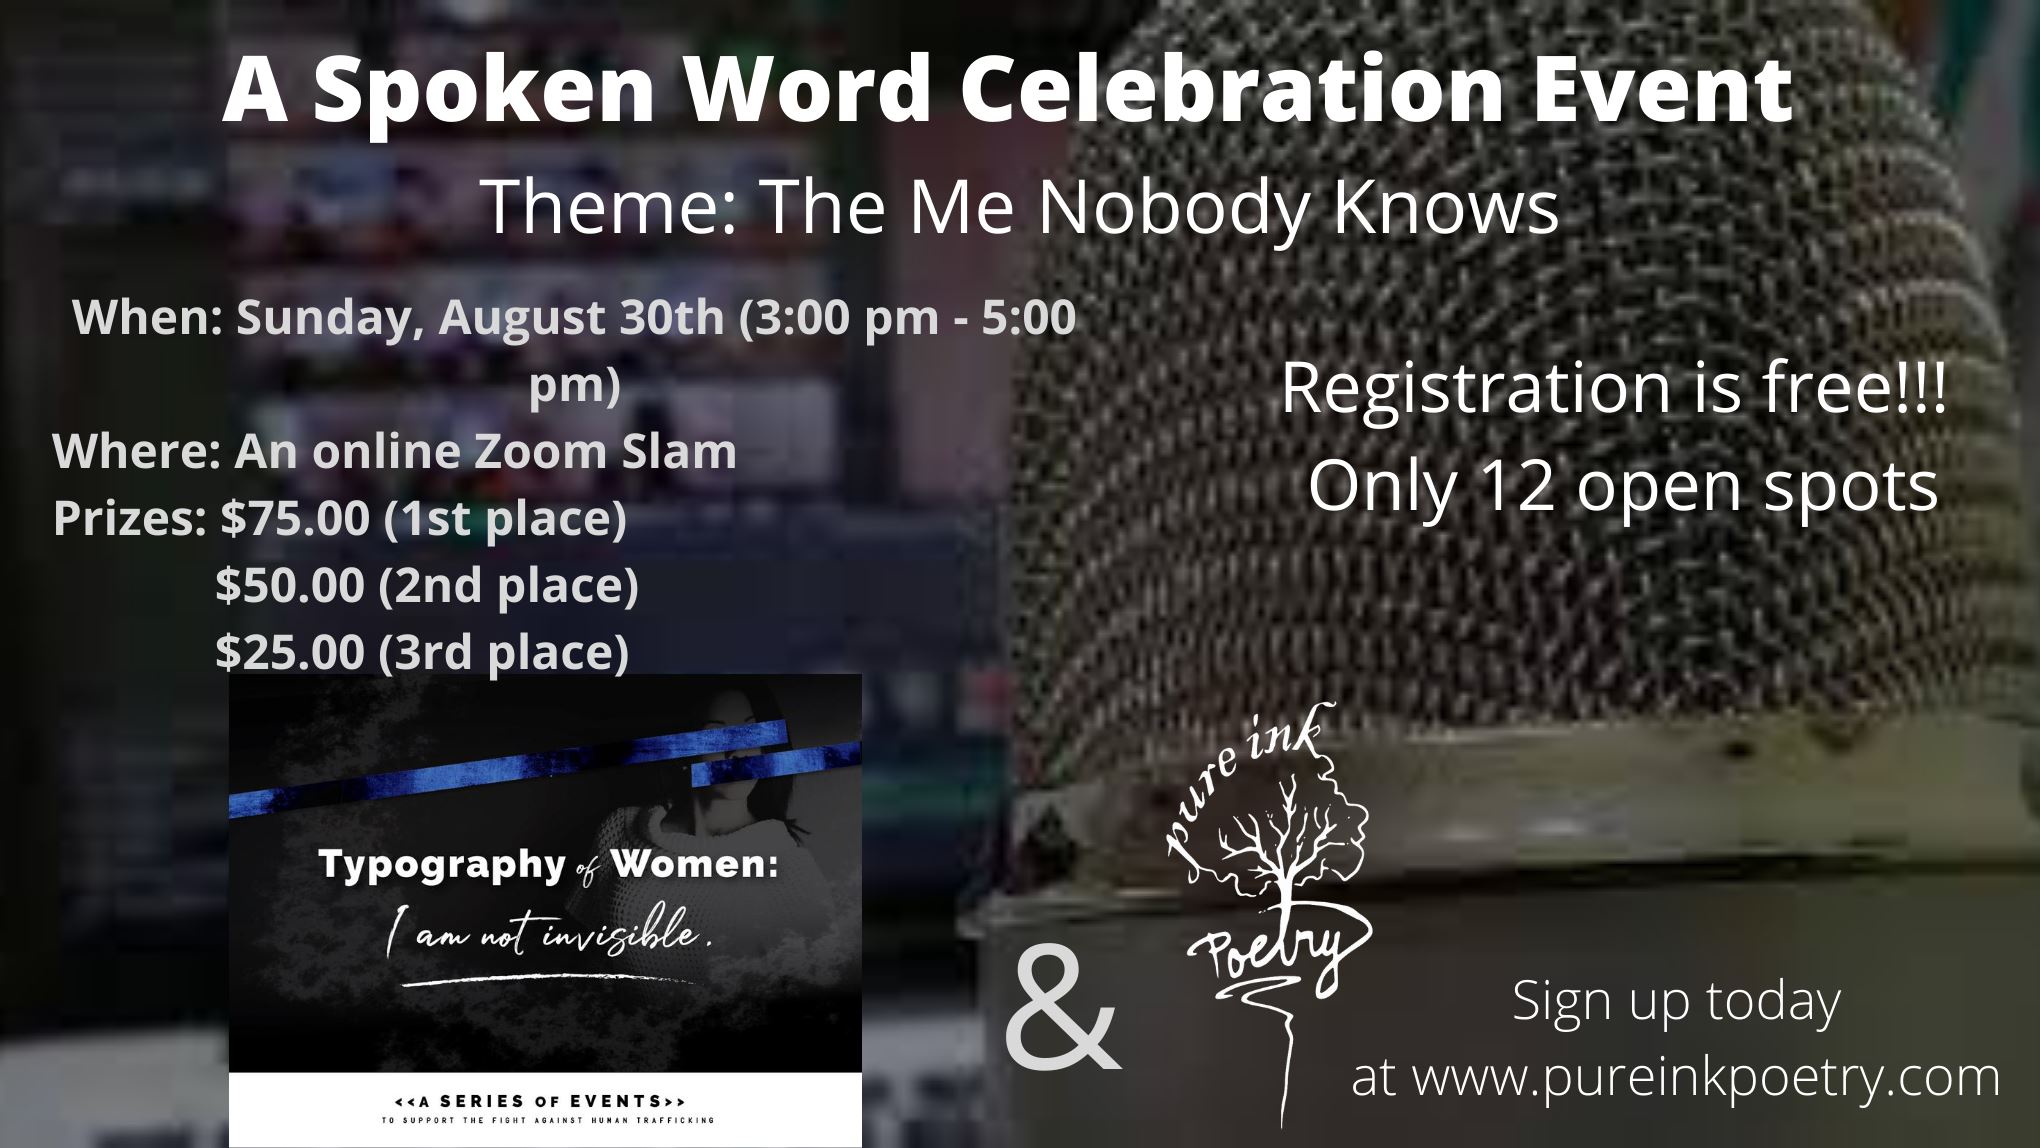 A Spoken Word Celebration Event: The Me nobody knows